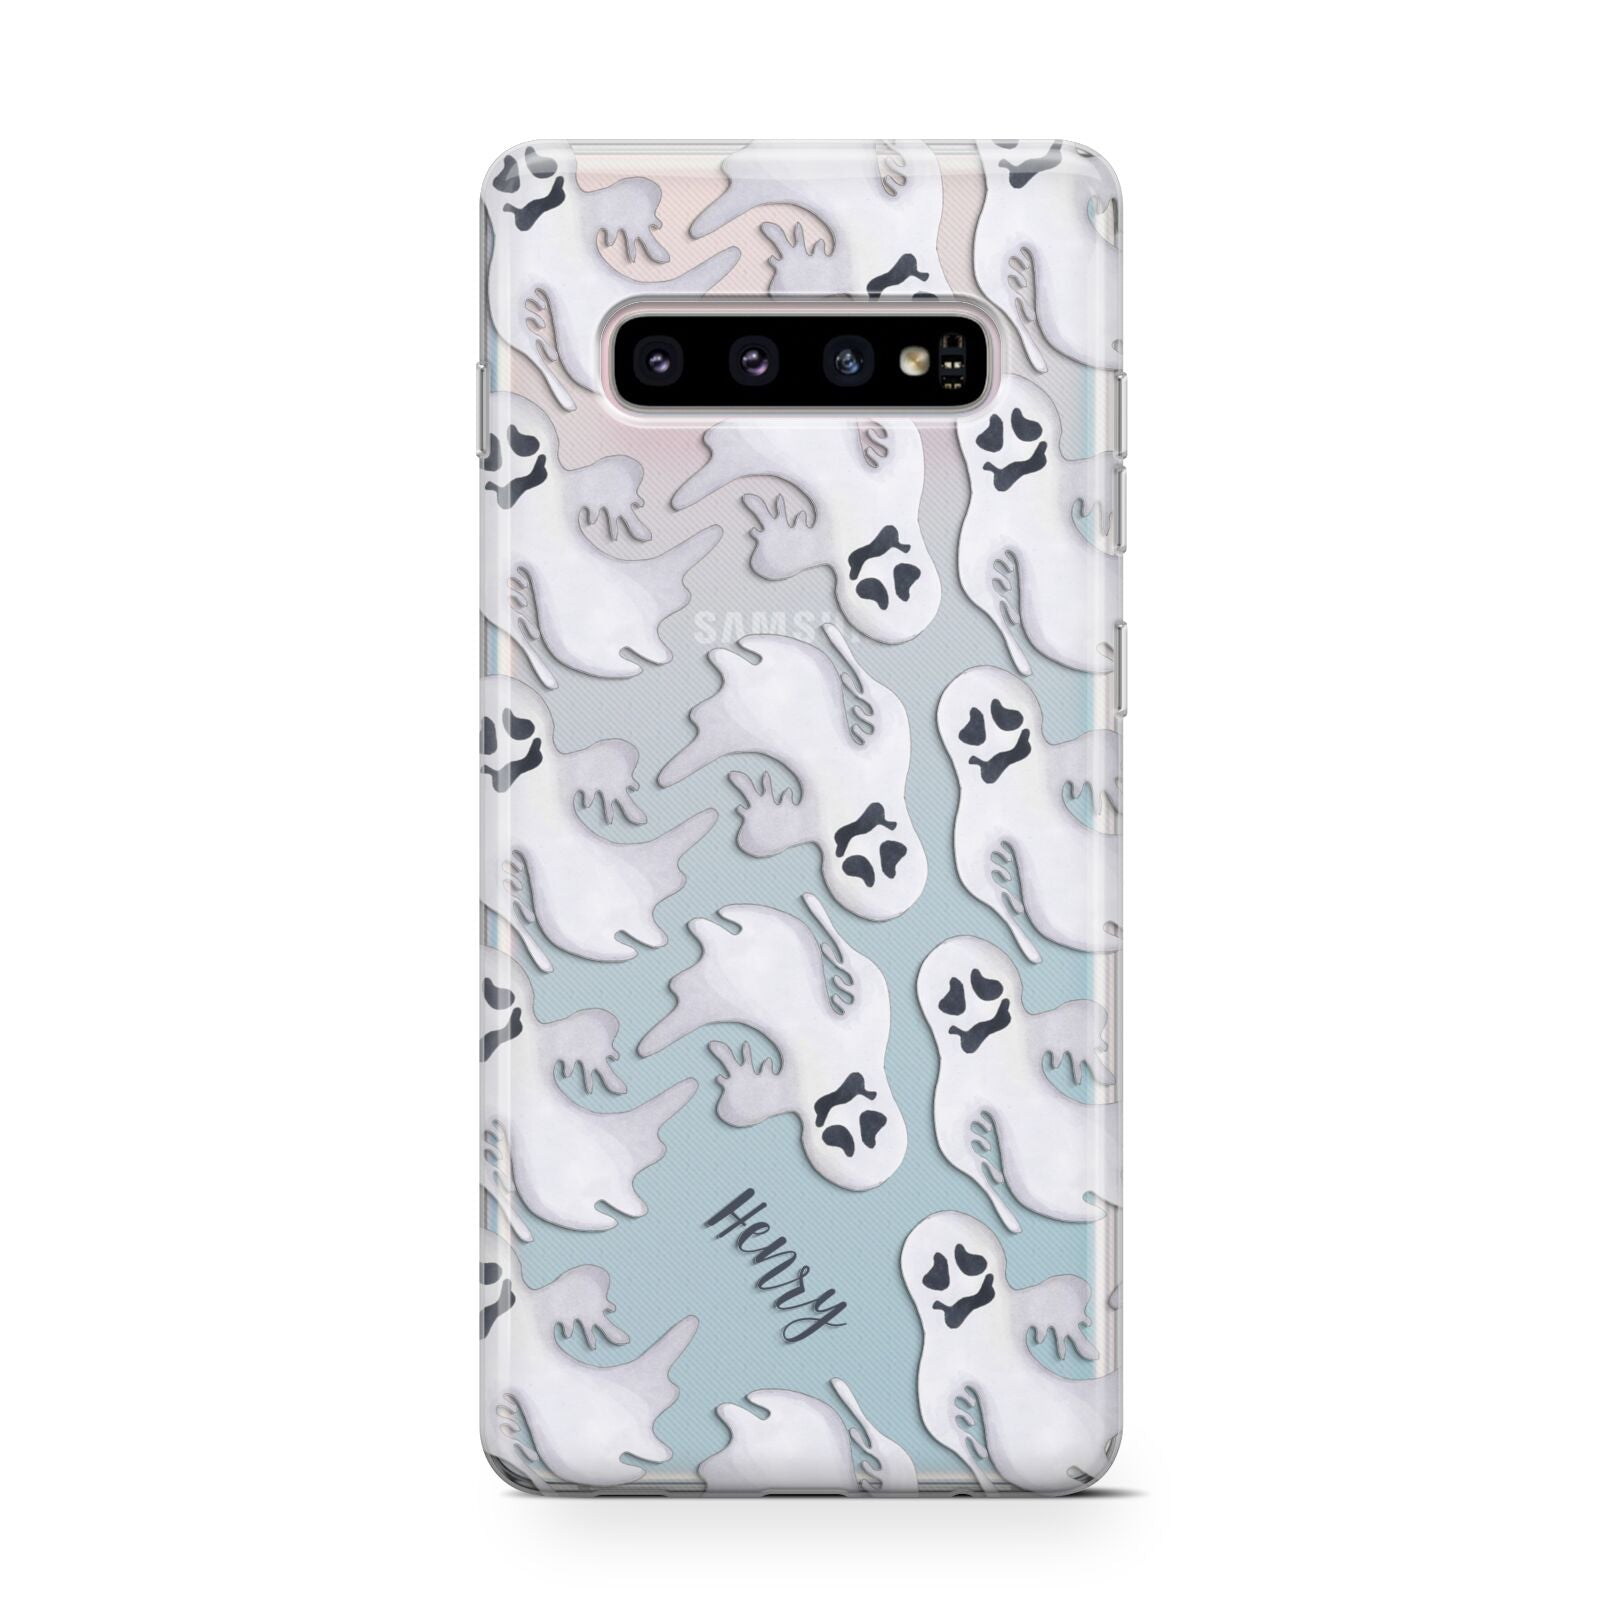 Floaty Ghosts Personalised Samsung Galaxy S10 Case